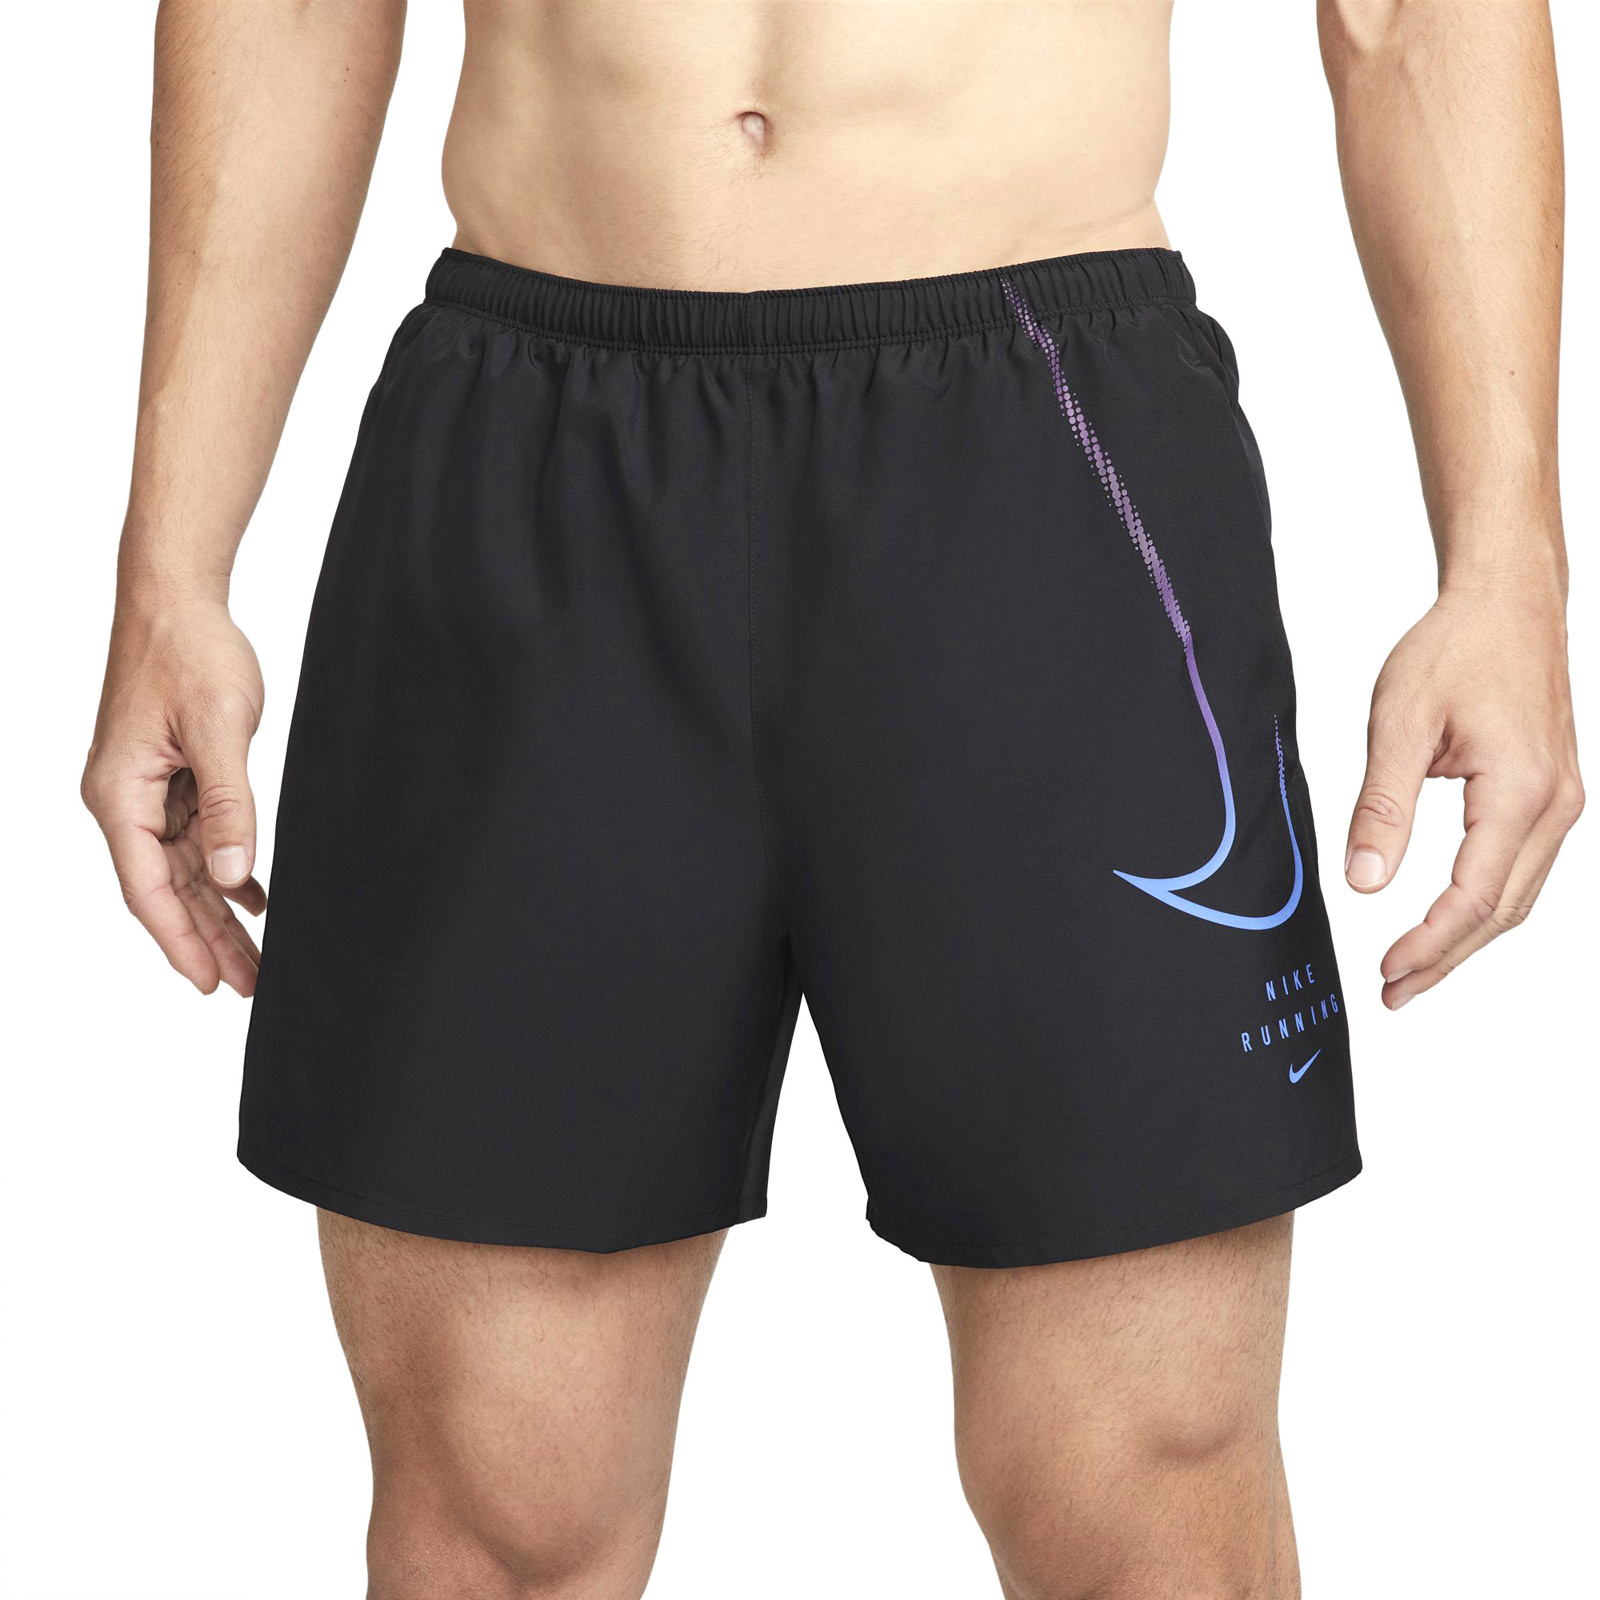 NIKE DRI-FIT RUN DIVISION CHALLENGER MENS 5" BRIEF-LINED SHORTS